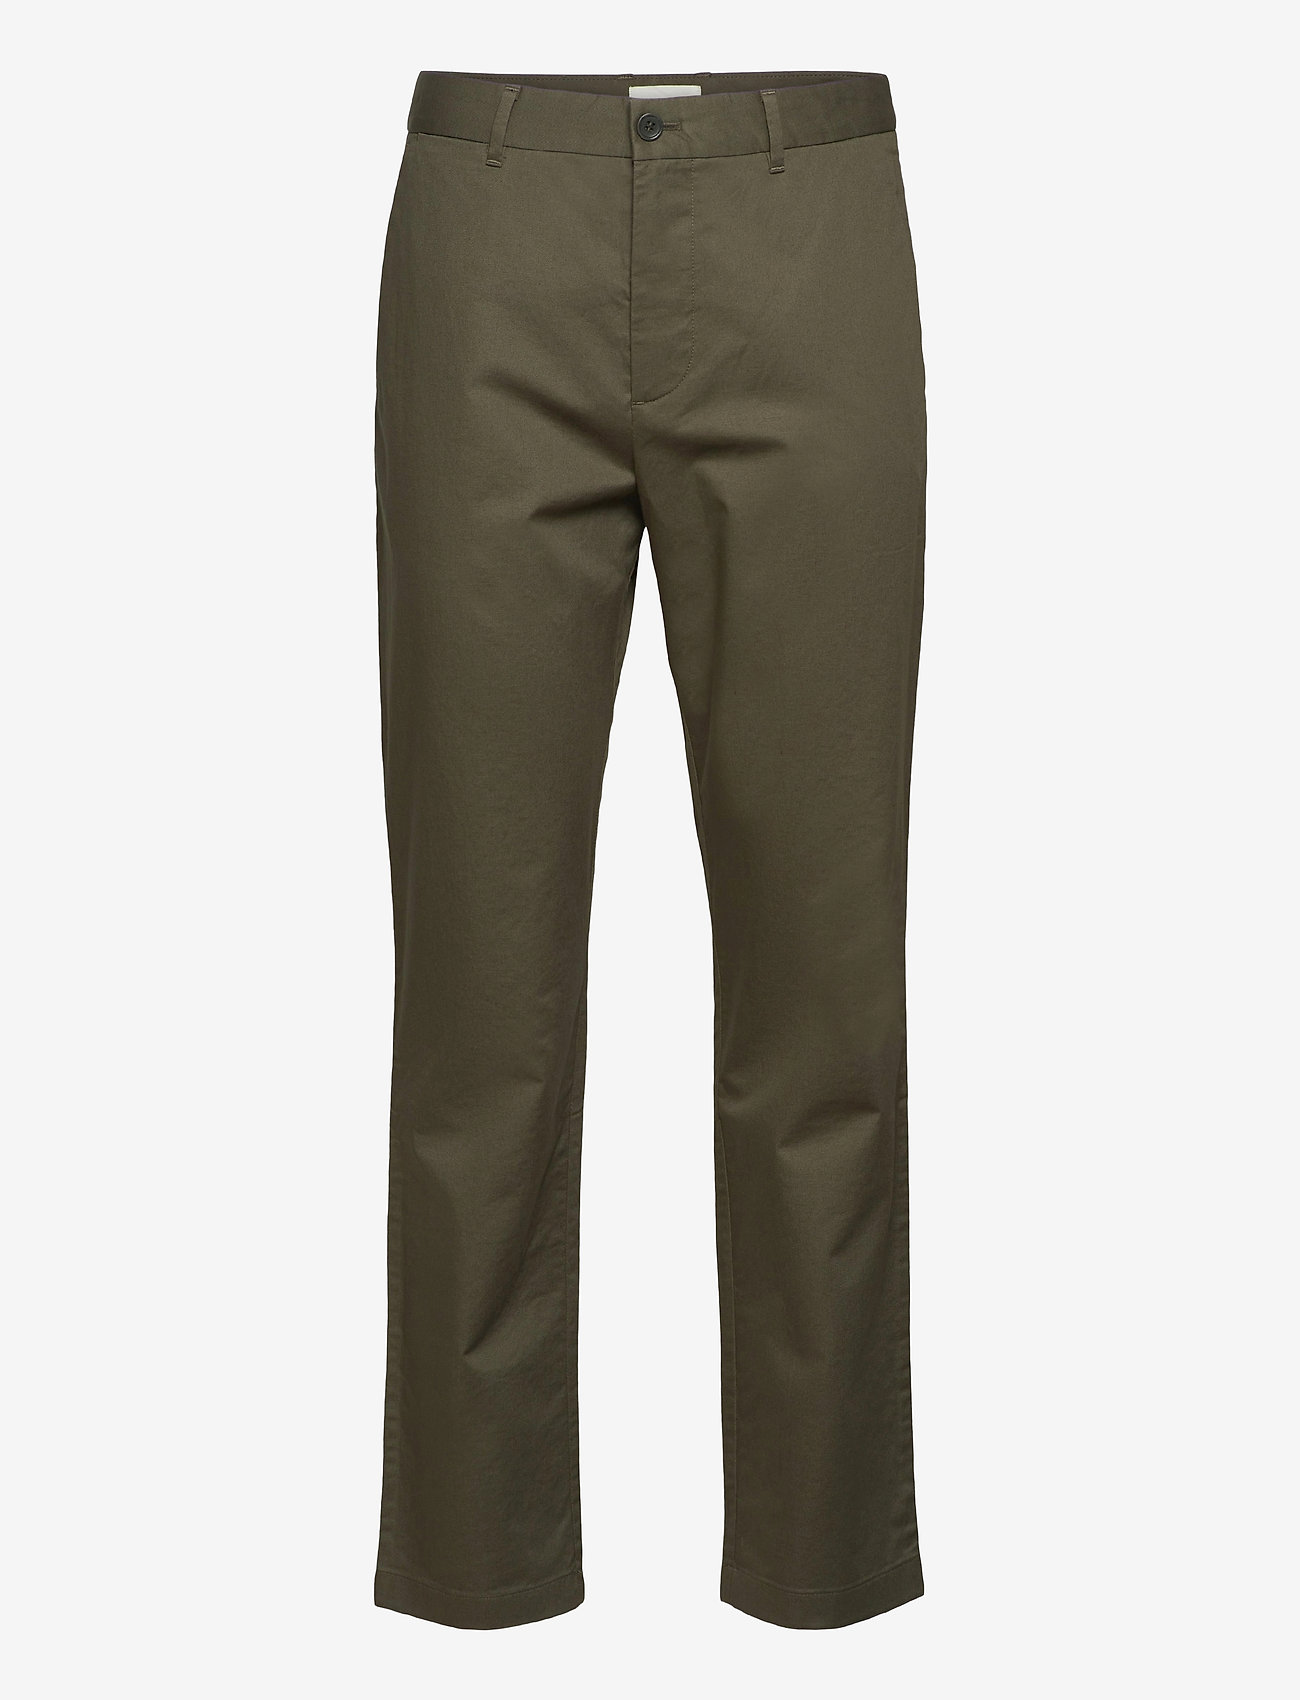 Wood Wood - Marcus light twill trousers - chino's - olive - 0